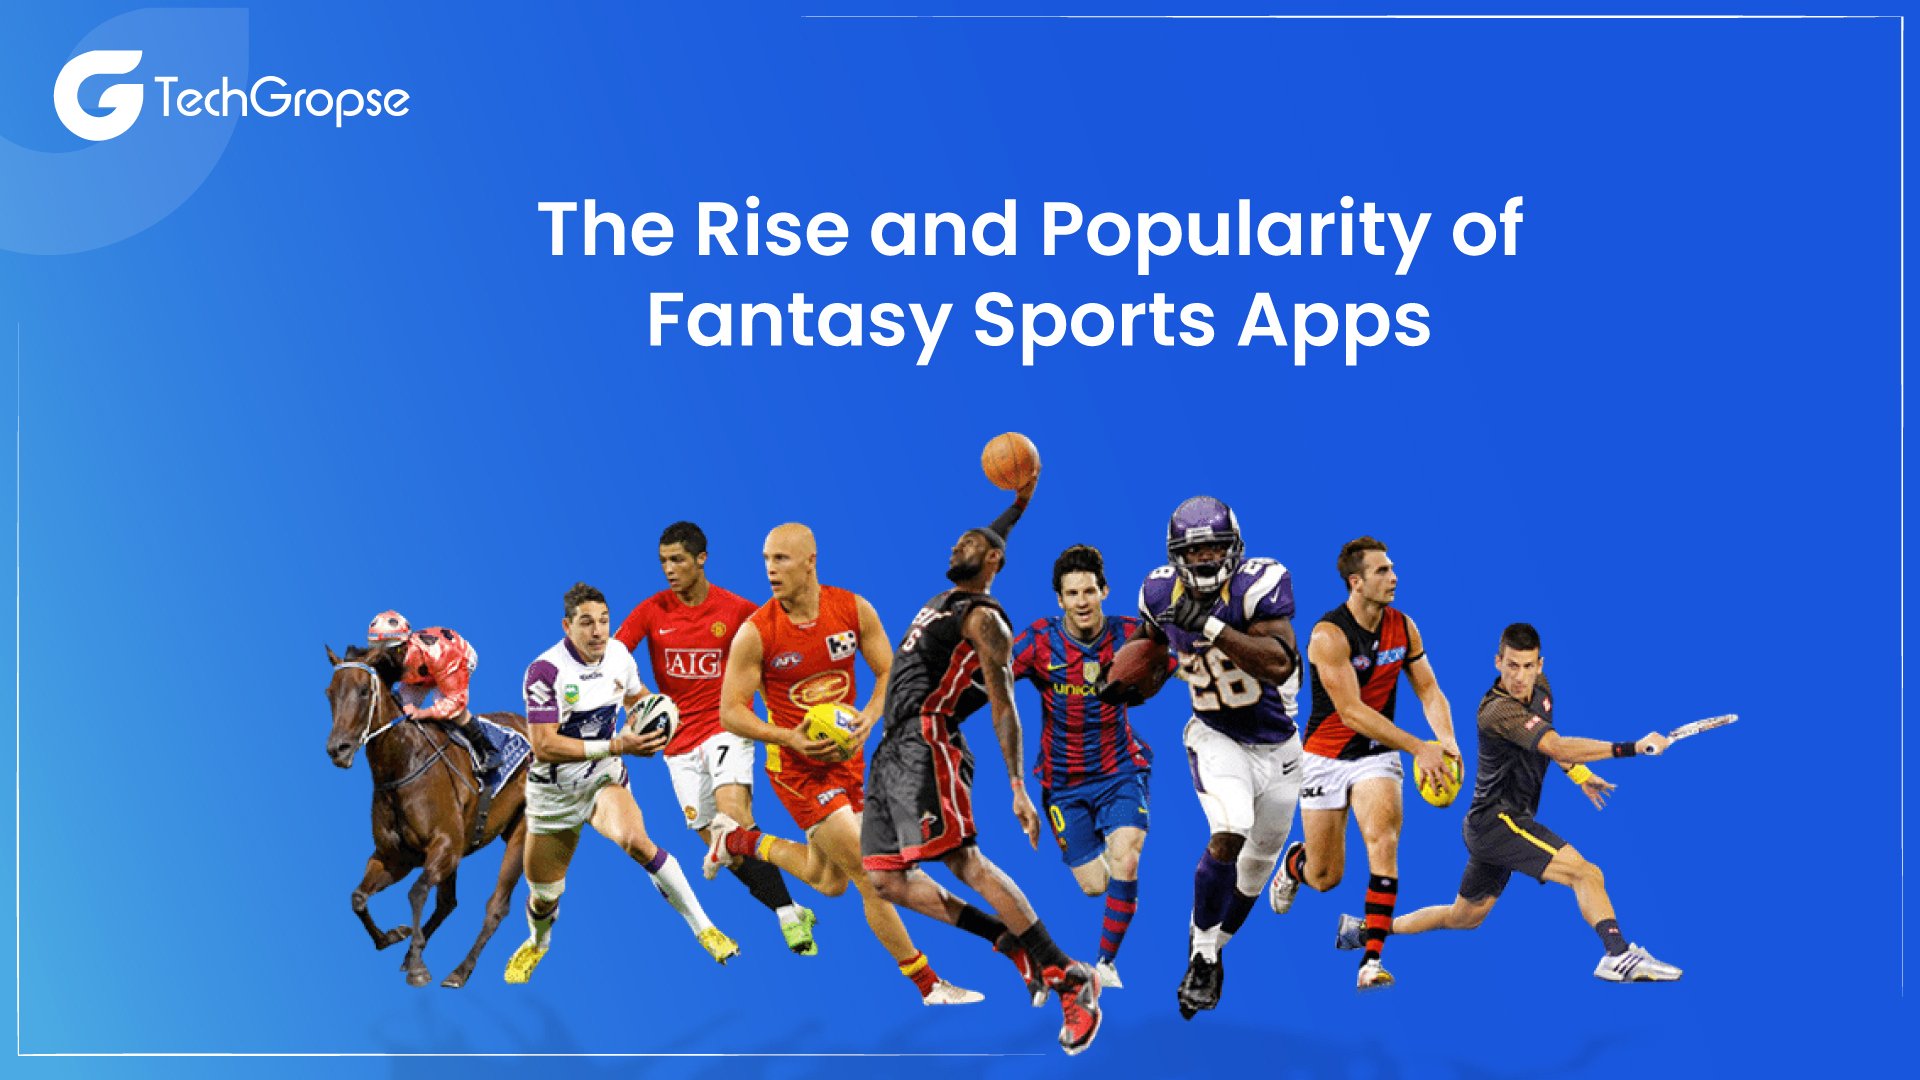 The Rise and Popularity of Fantasy Sports Apps